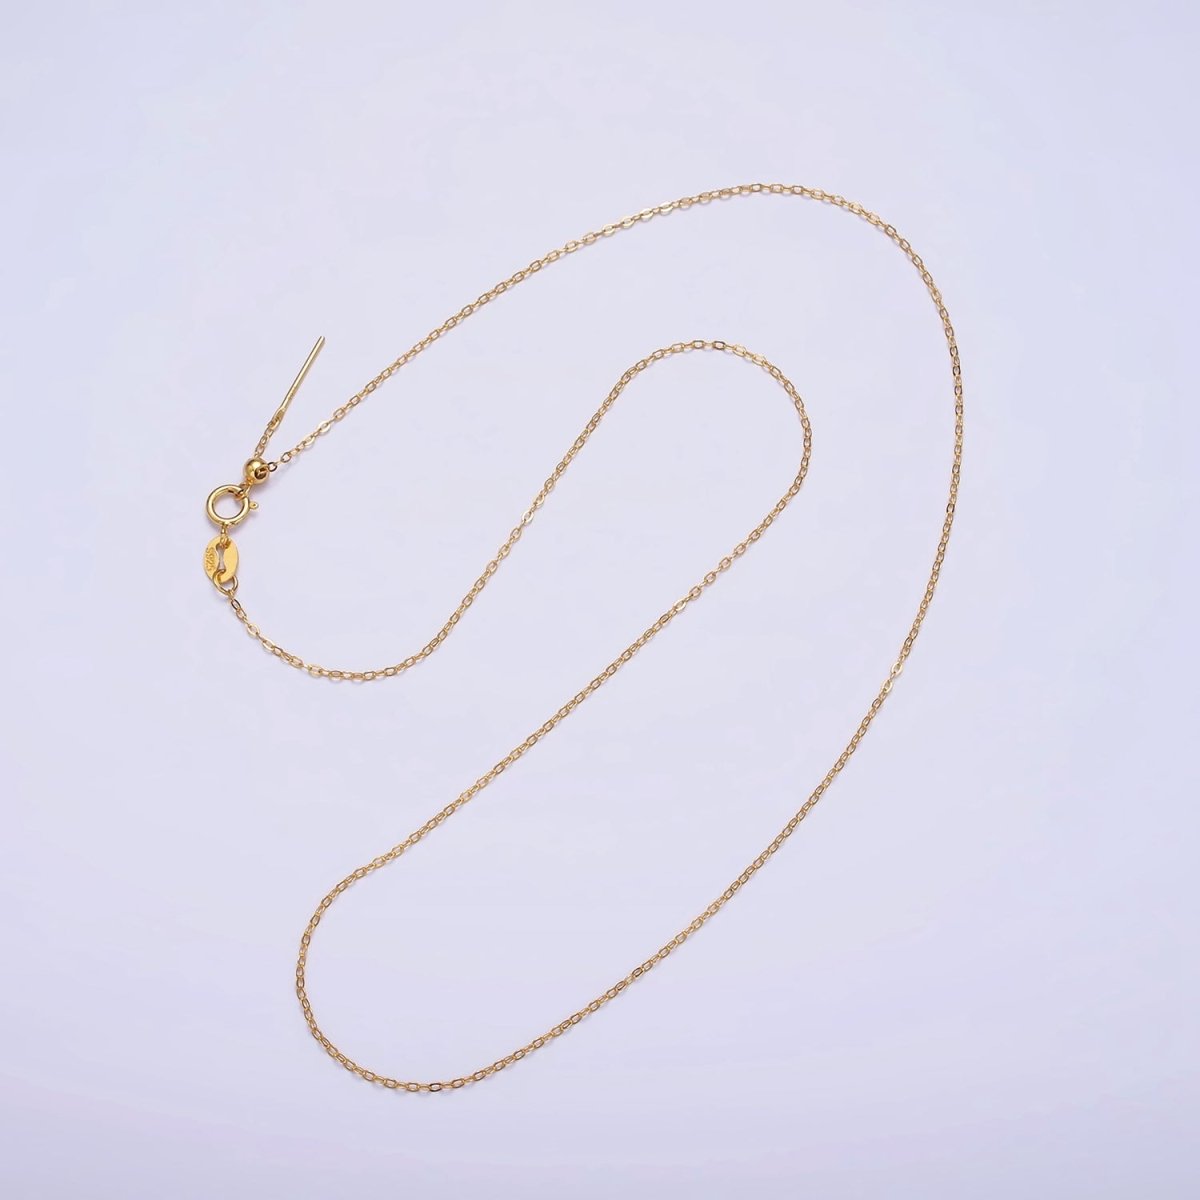 24K Gold Vermeil Cable Link Necklace Chain, 925 Sterling Silver Necklace Chain w/ Heavy 24K Gold Plated 18 inch | WA-1955 Clearance Pricing - DLUXCA